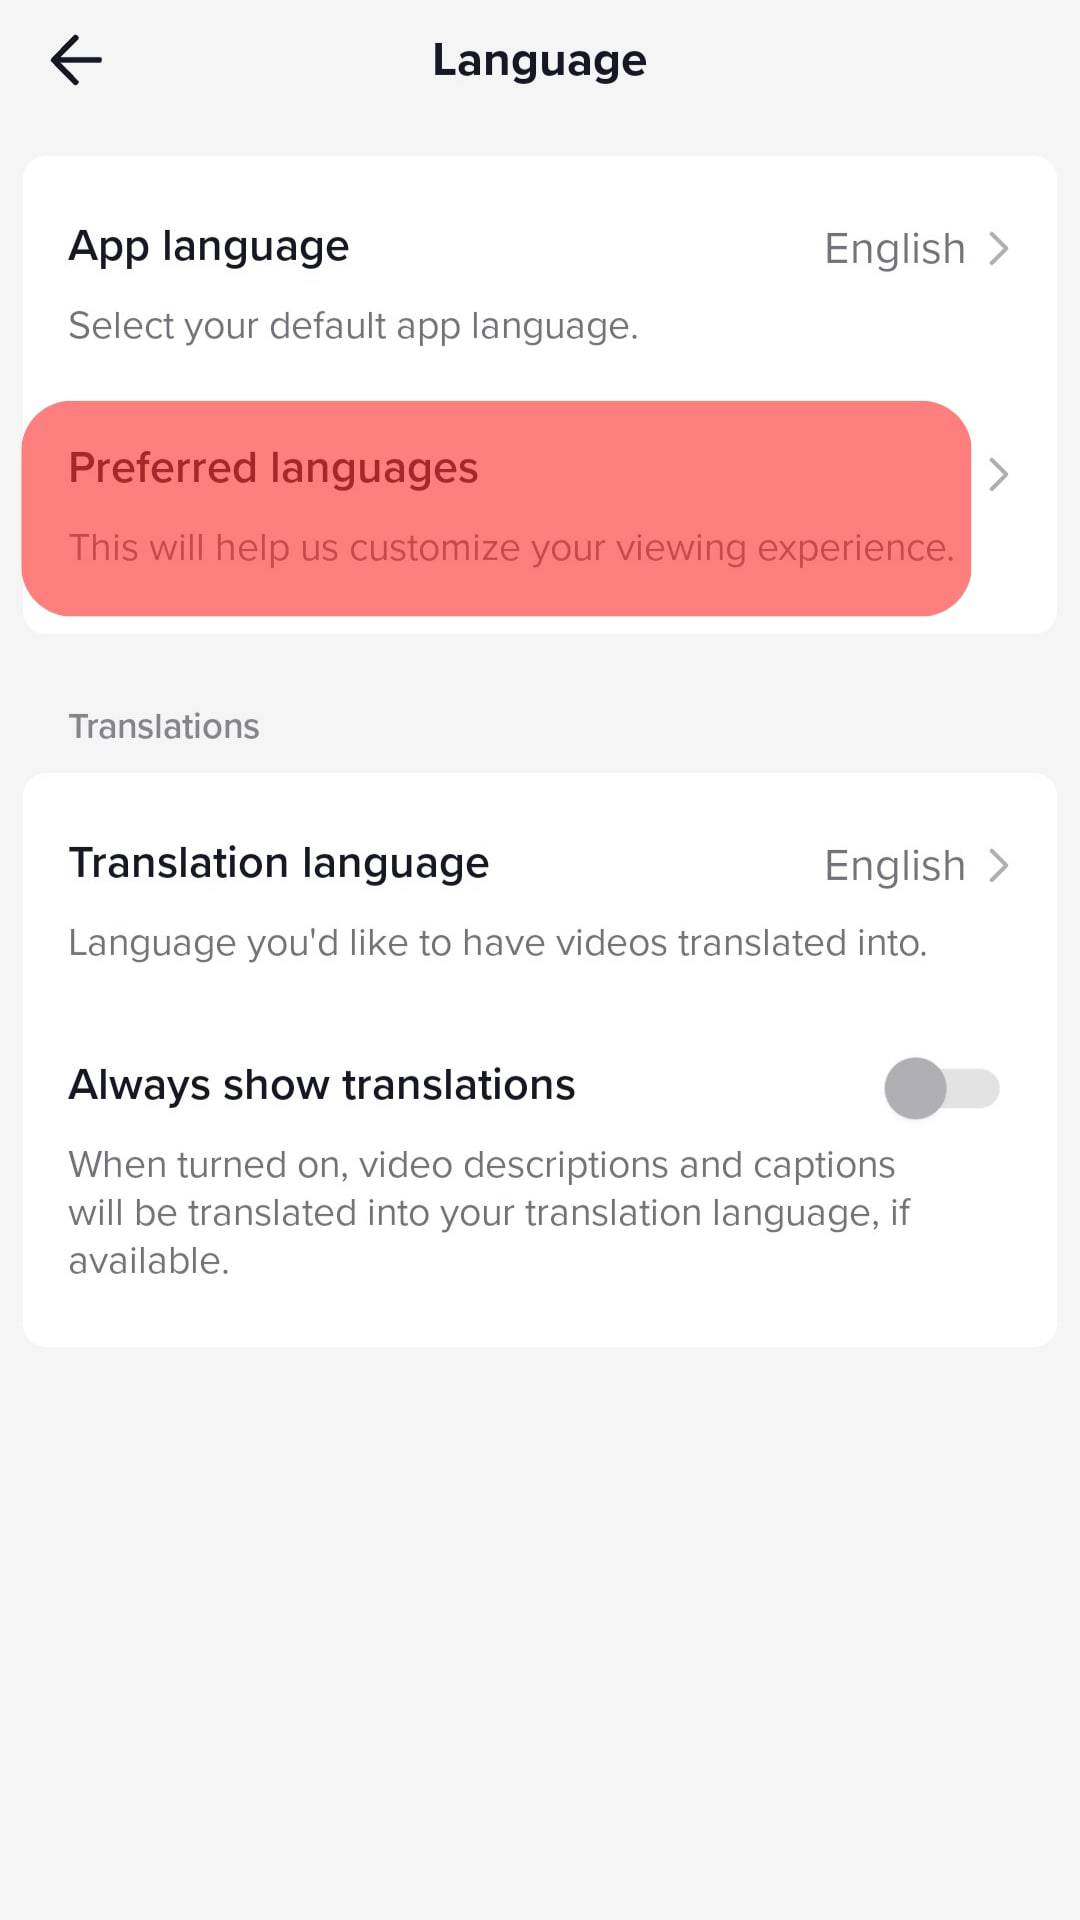 Tap On Preferred Languages